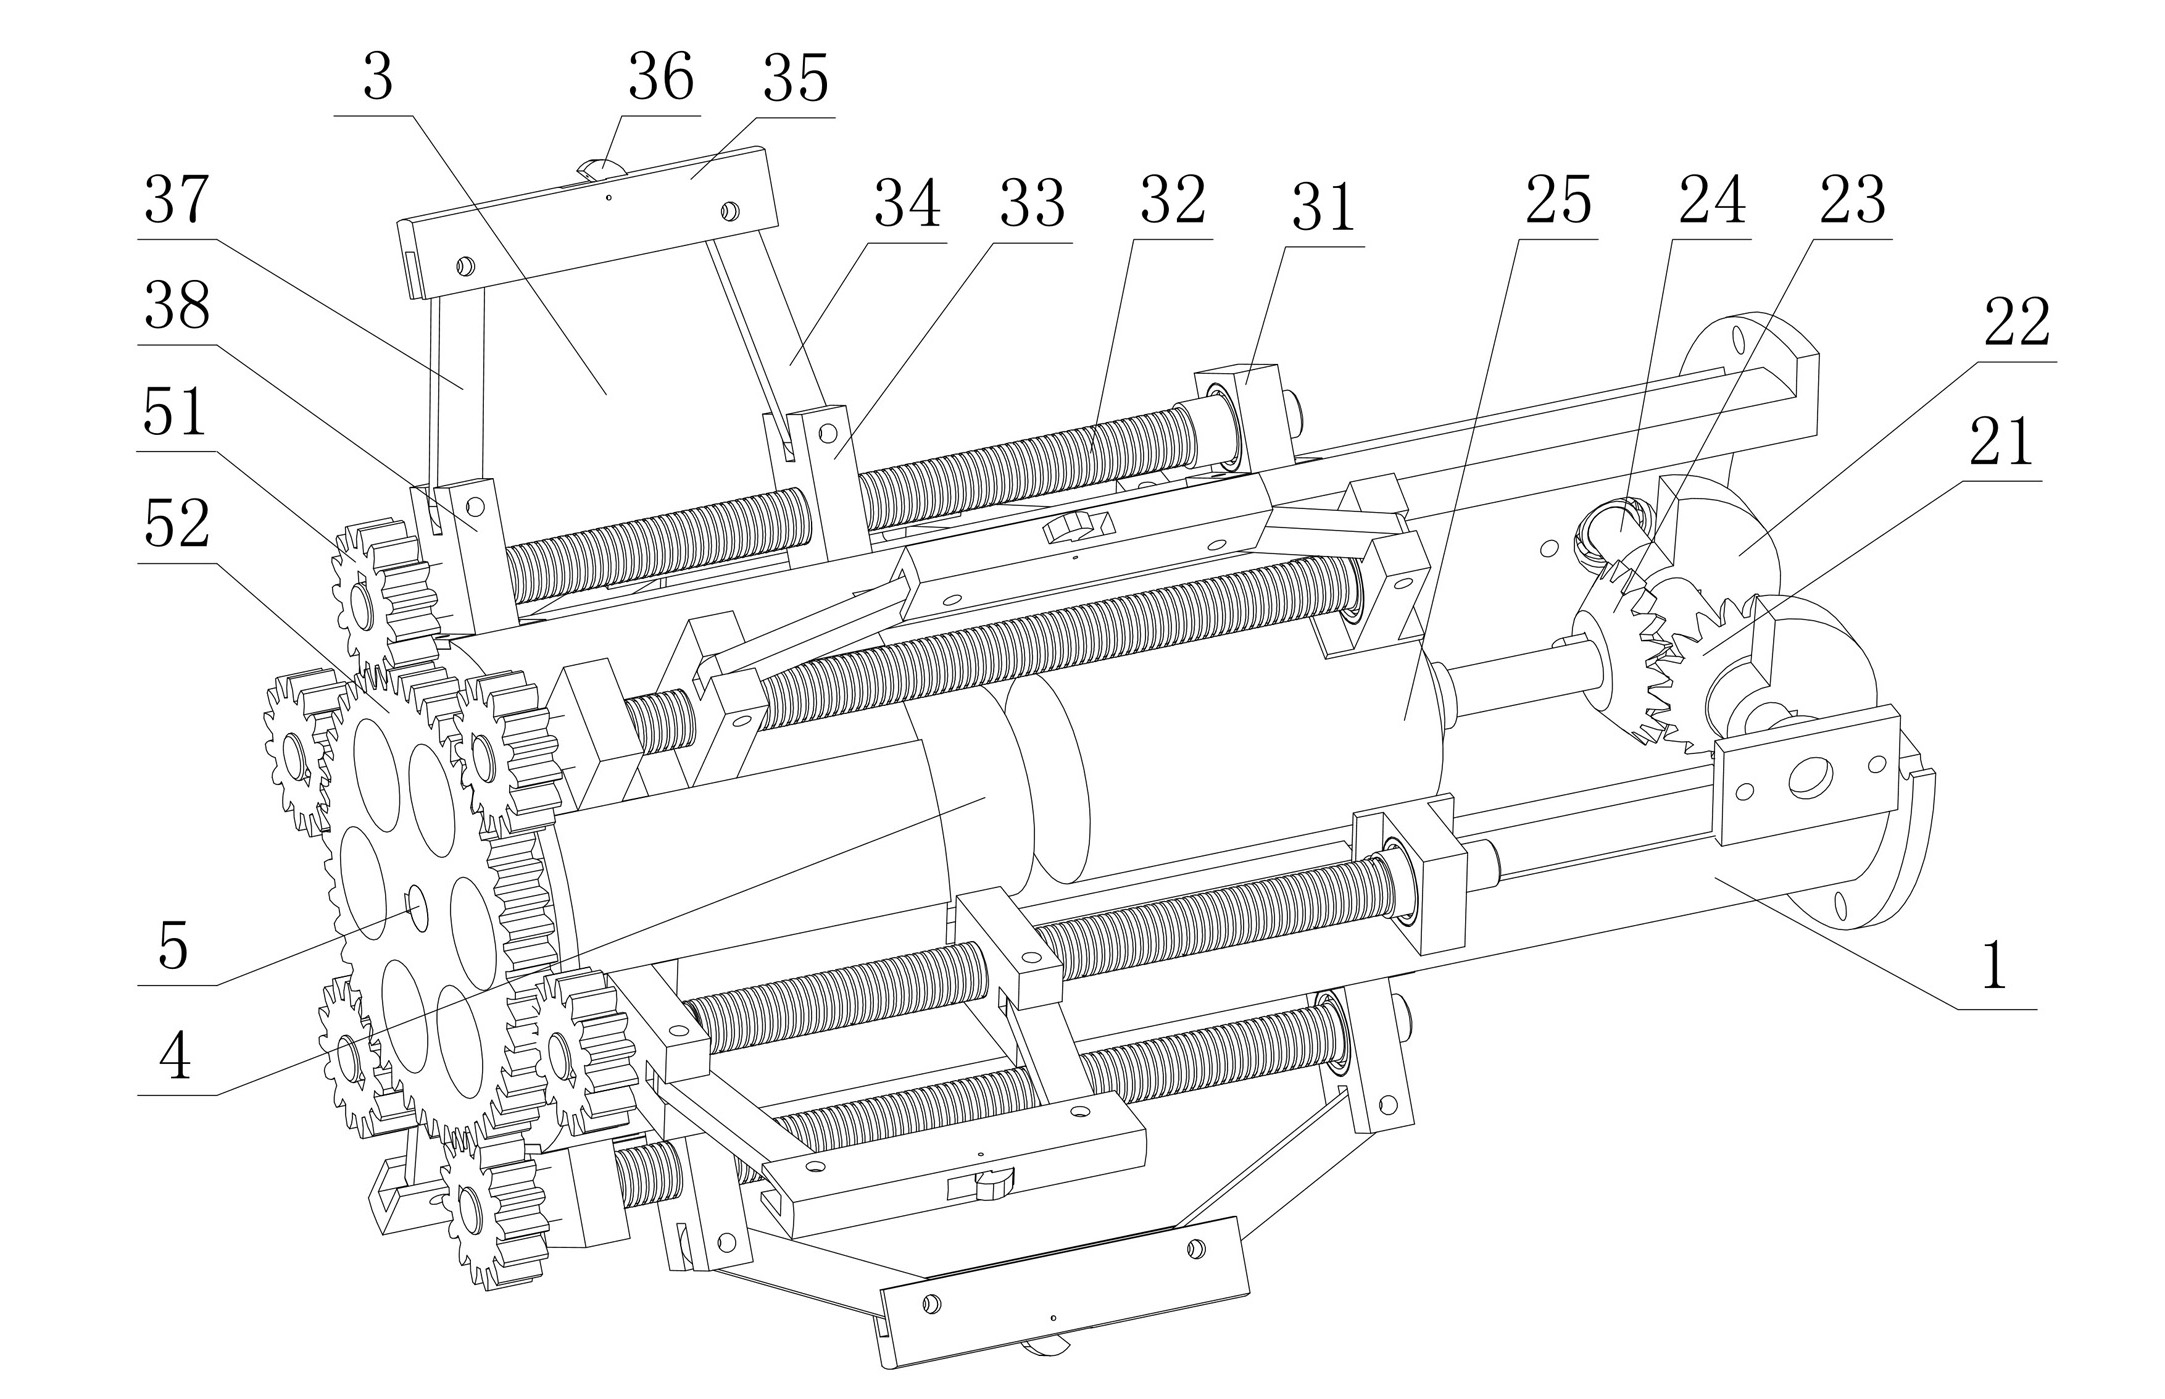 Centrifugal force drive based drawing device for equipment in pipeline